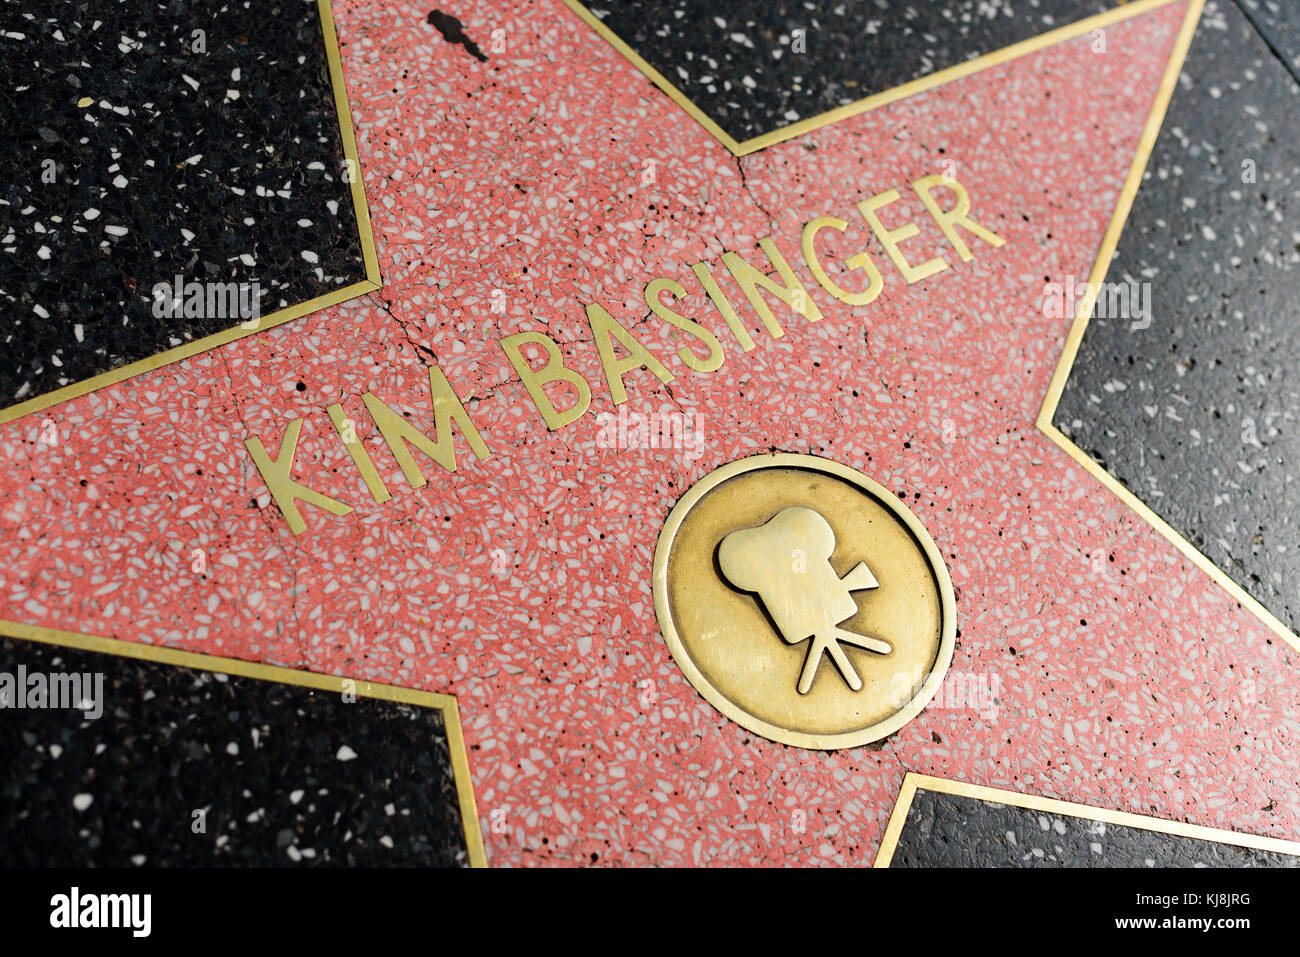 HOLLYWOOD, CA - DECEMBER 06: Kim Basinger star on the Hollywood Walk of Fame in Hollywood, California on Dec. 6, 2016. Stock Photo